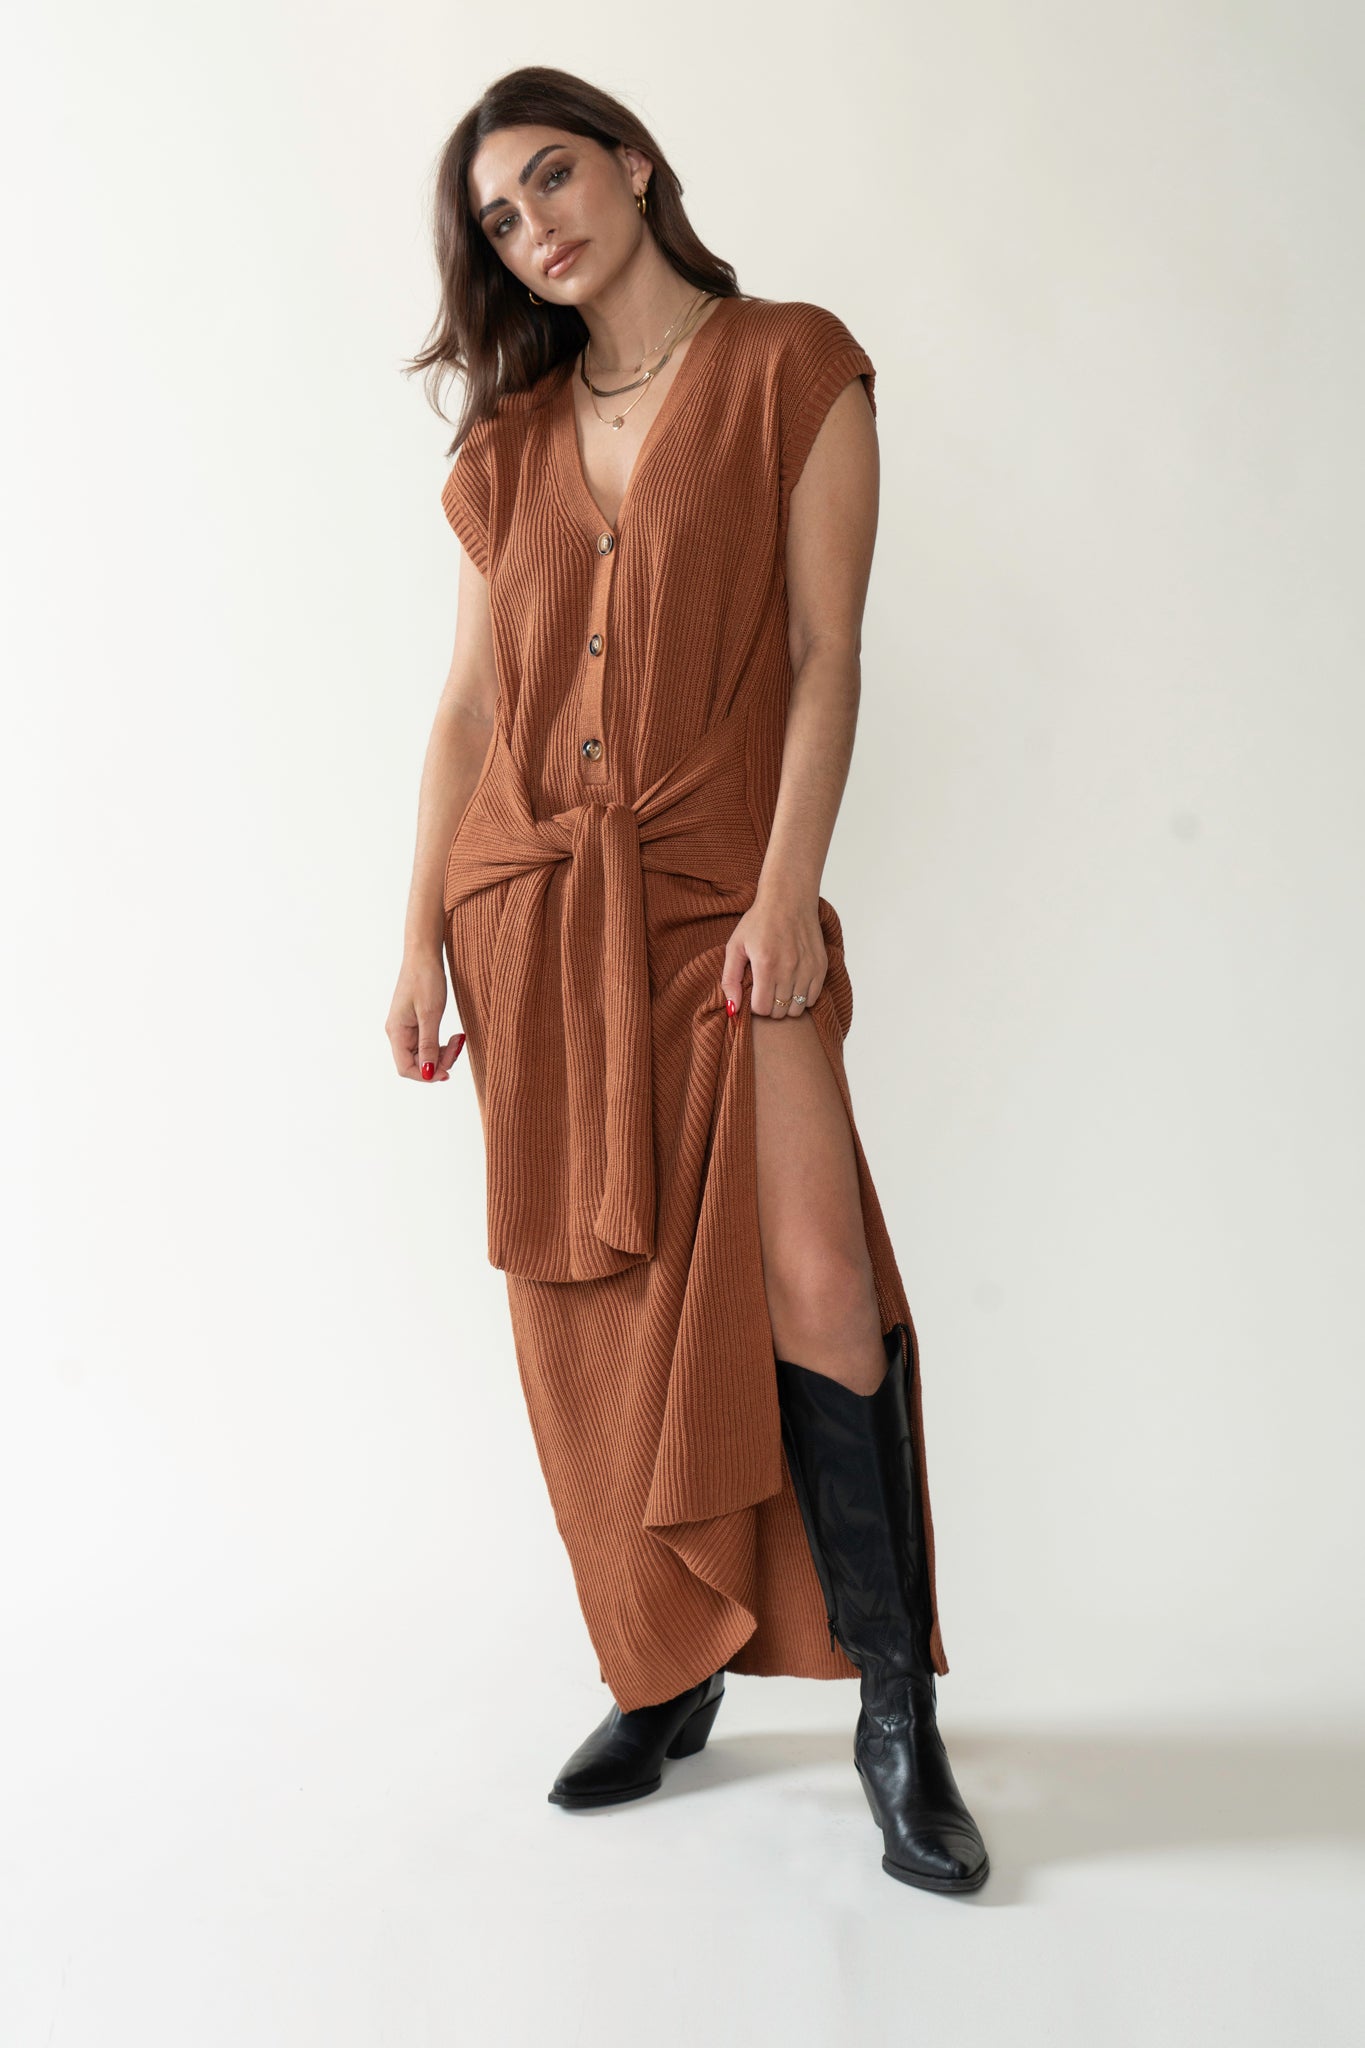 View 1 of Bosa Midi Sweater Dress, a Dresses from Larrea Cove. Detail: Looking for the perfect fall dress? Look...